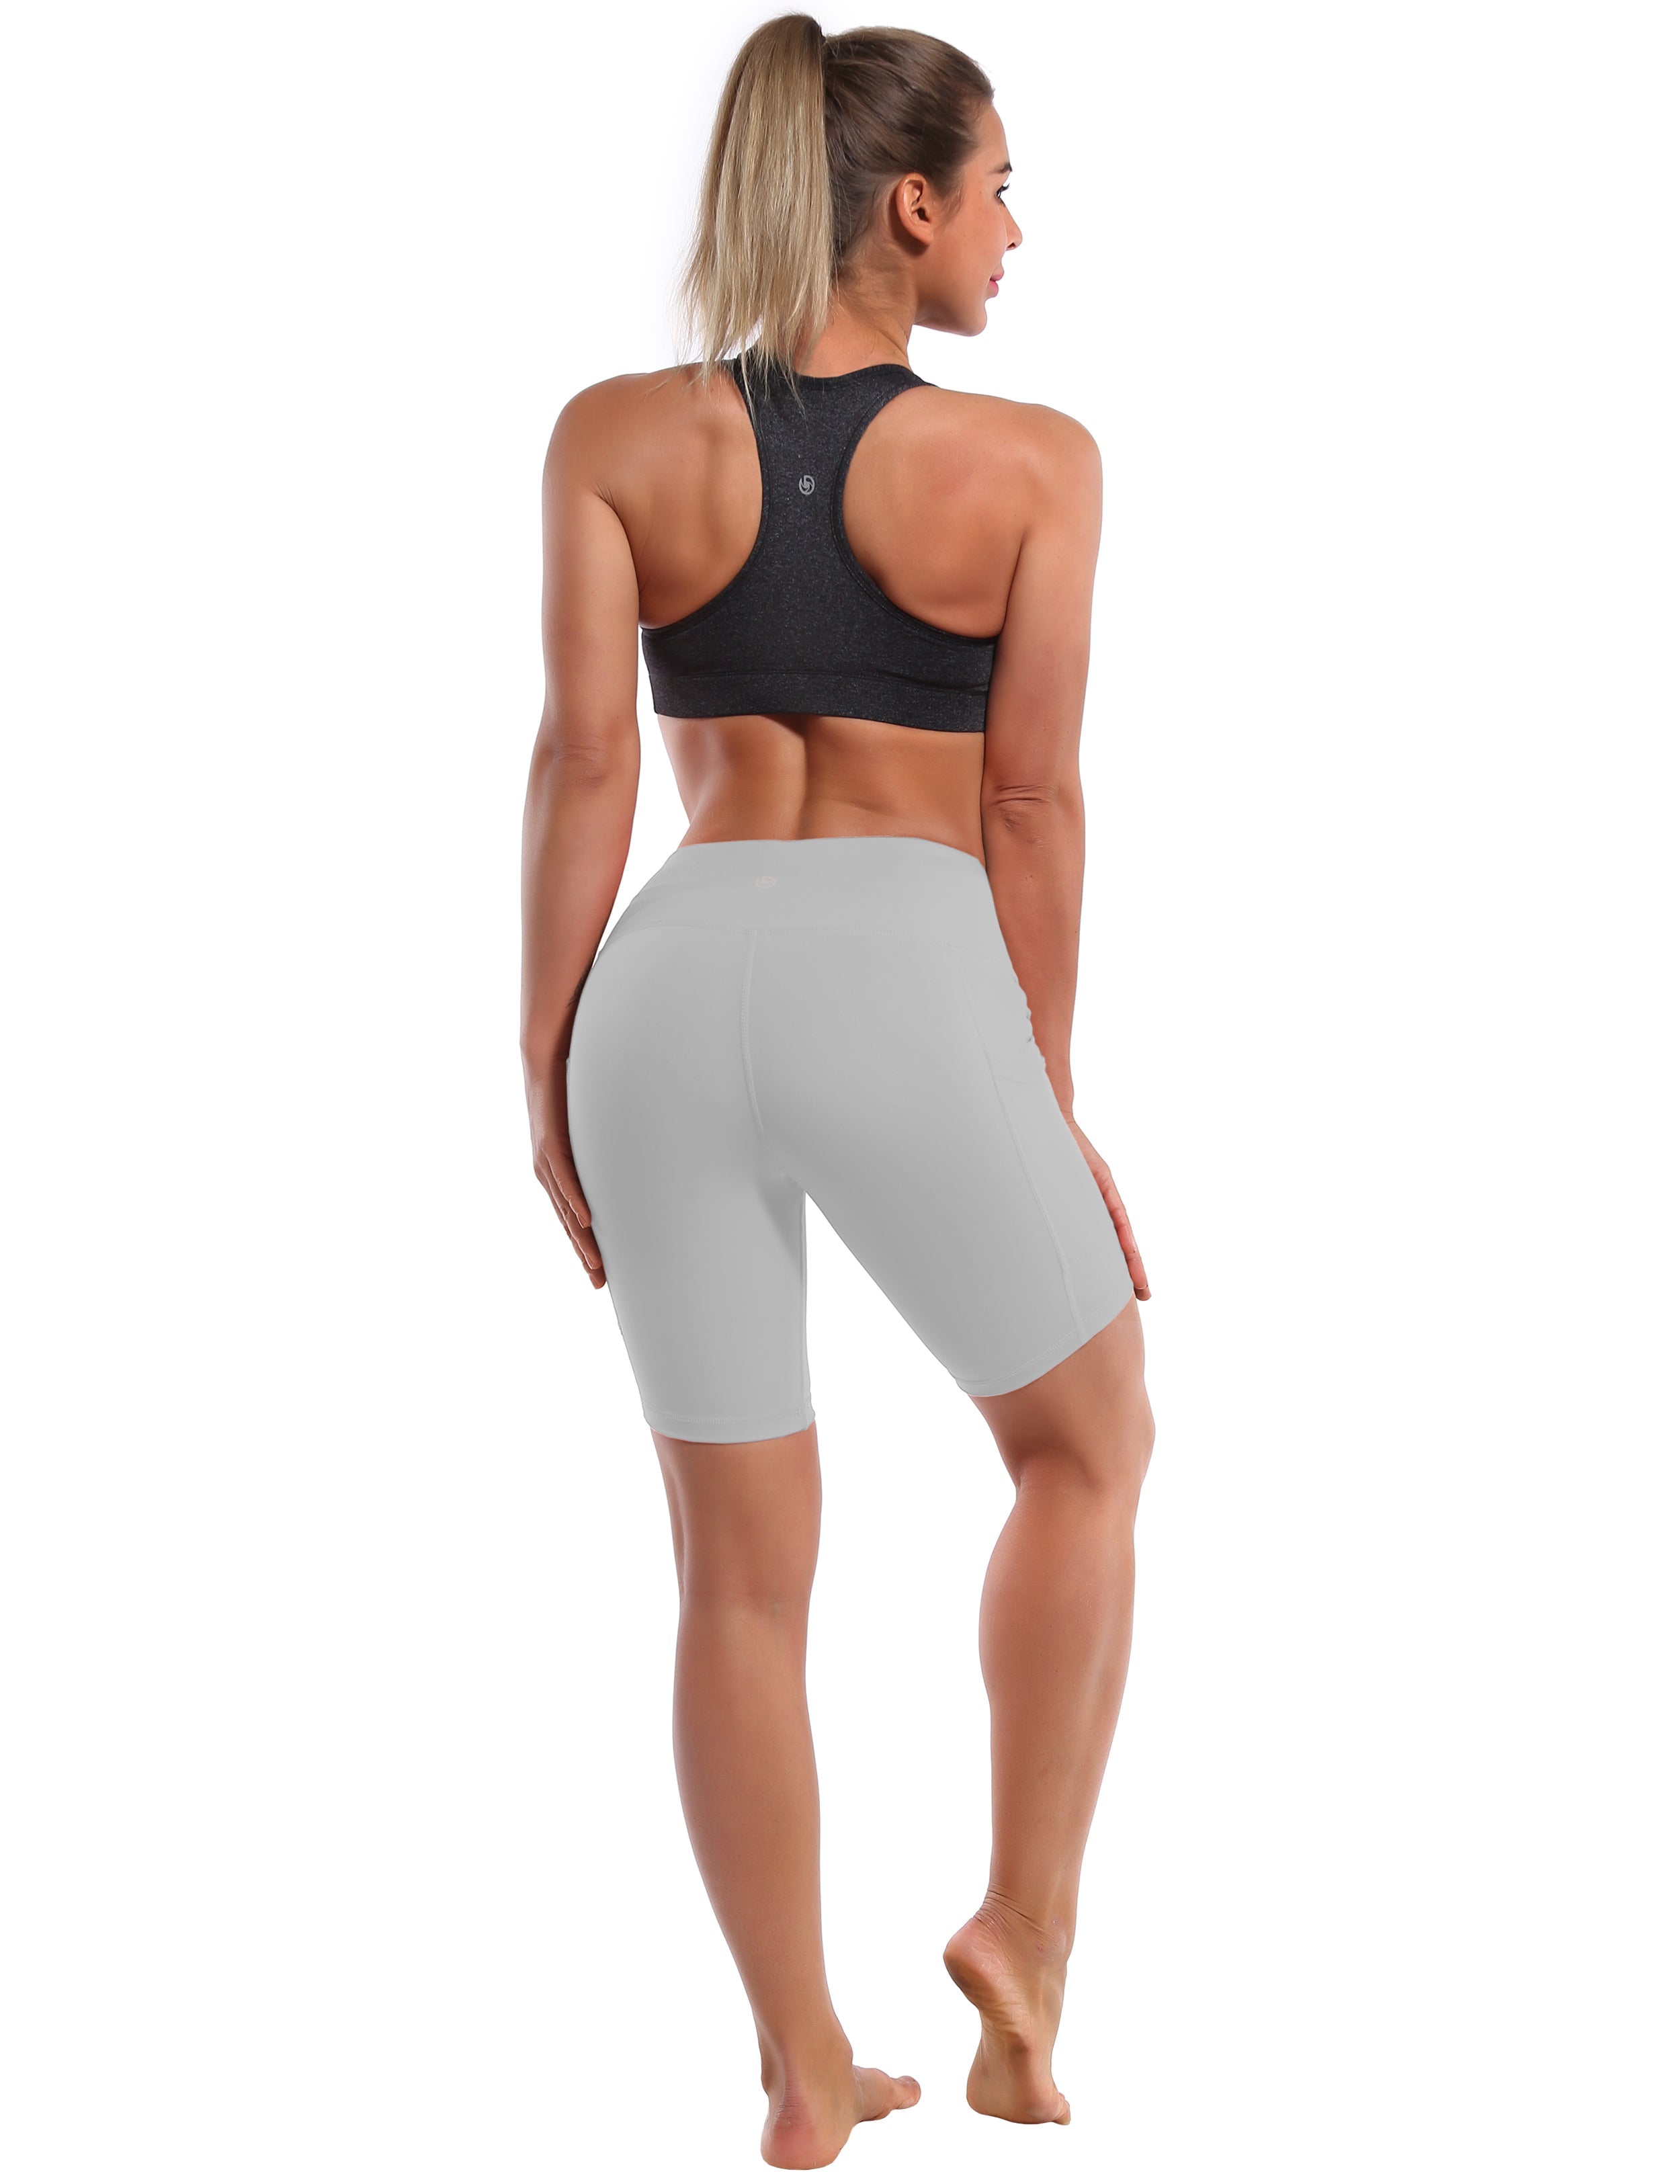 8" Side Pockets Golf Shorts lightgray Sleek, soft, smooth and totally comfortable: our newest style is here. Softest-ever fabric High elasticity High density 4-way stretch Fabric doesn't attract lint easily No see-through Moisture-wicking Machine wash 75% Nylon, 25% Spandex